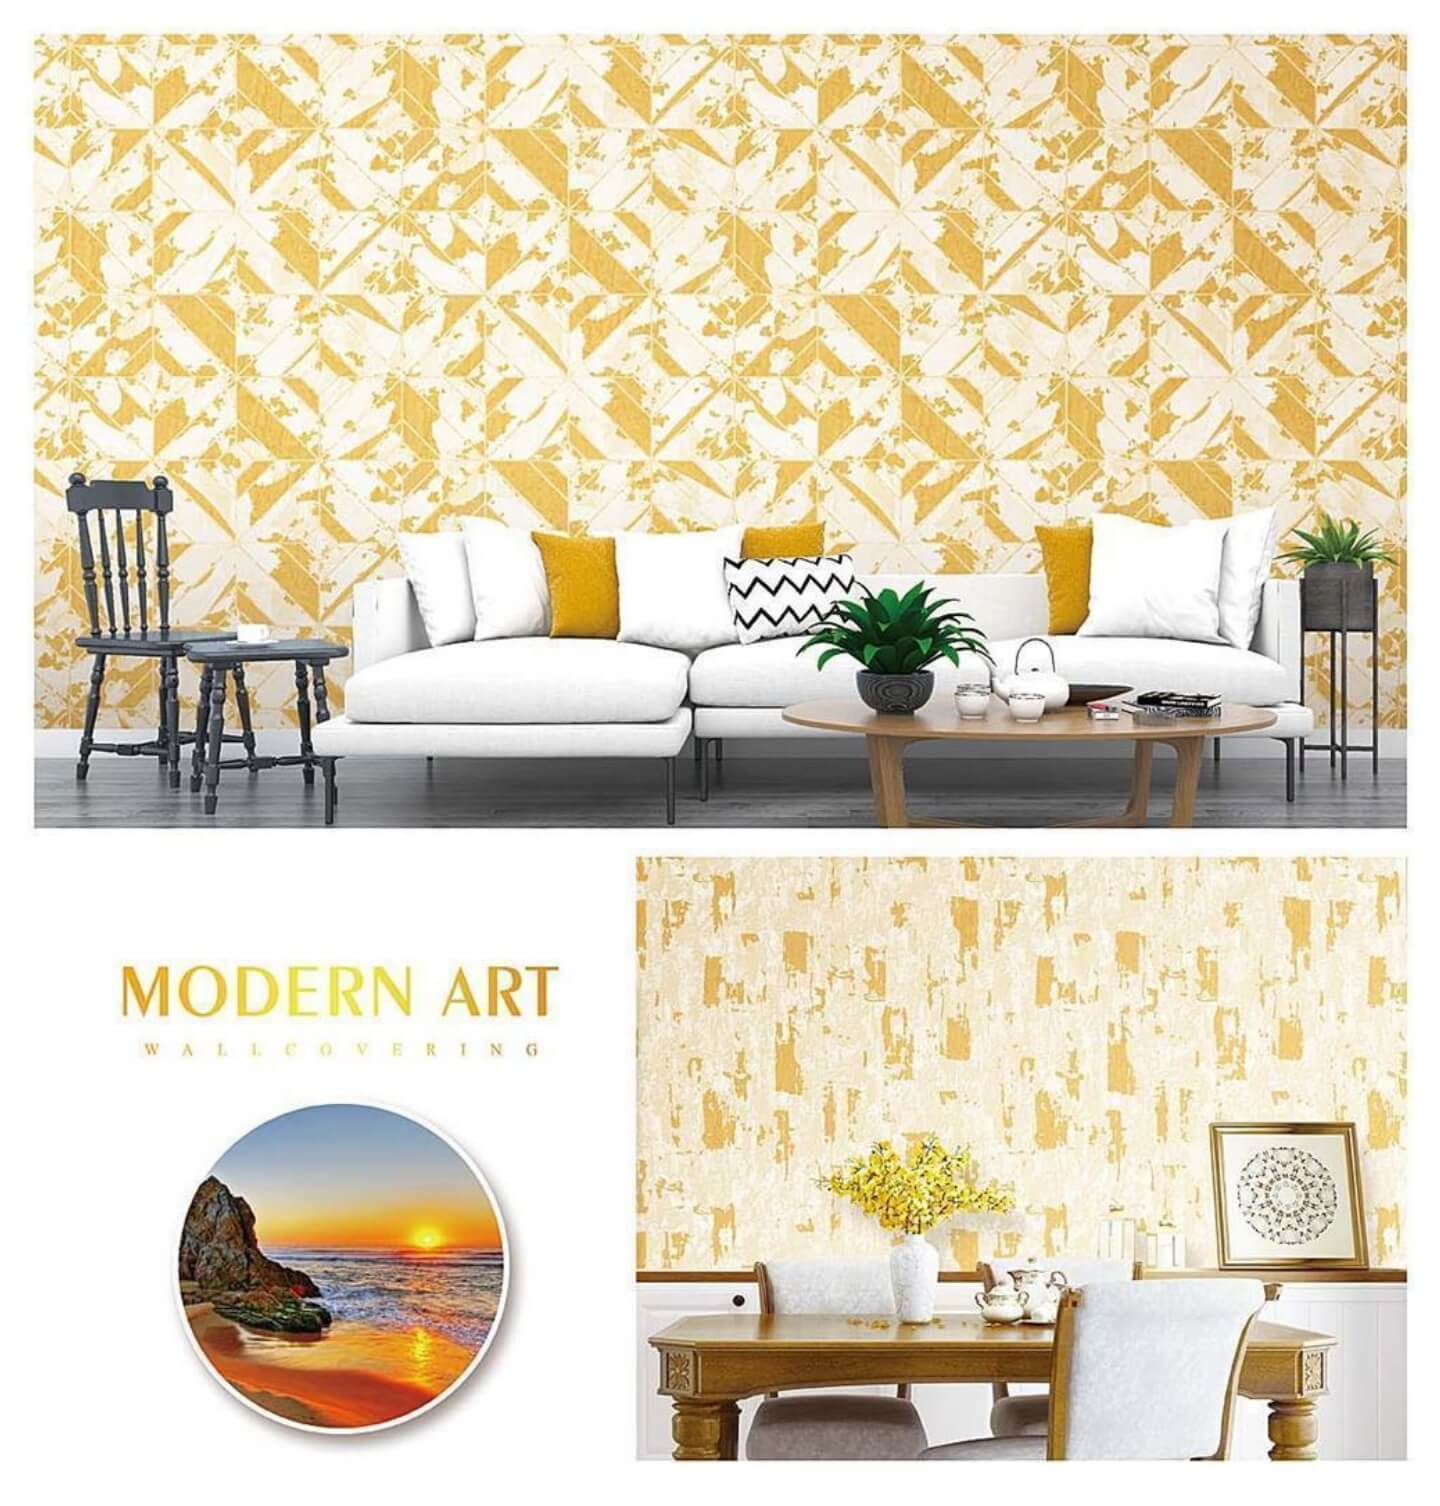 Beautiful Color 3D Design Wallpaper Better choice For Living Area, Bedroom, kids room, Office Durable PVC Wallpapers (34)